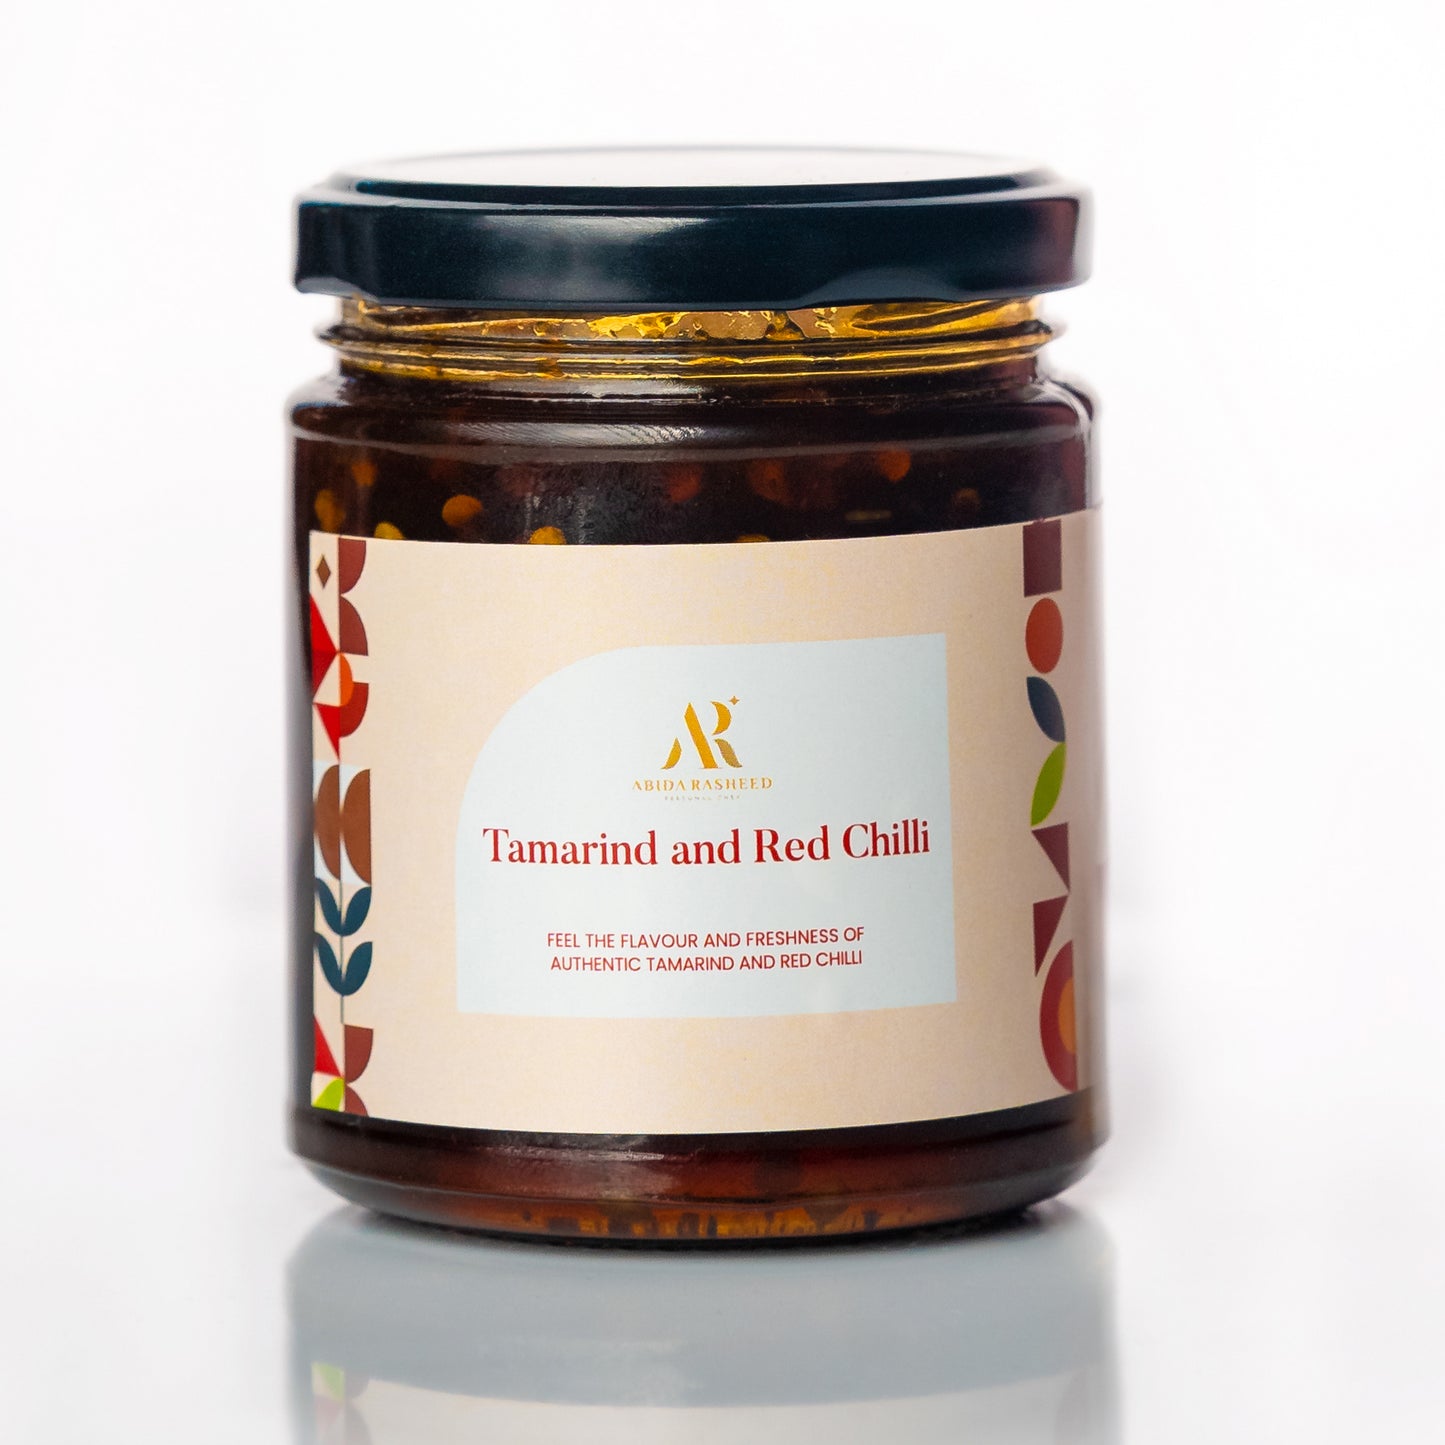 Abida Rasheed's Special Home Made Tamarind and Red Chilli Pickle (200g)